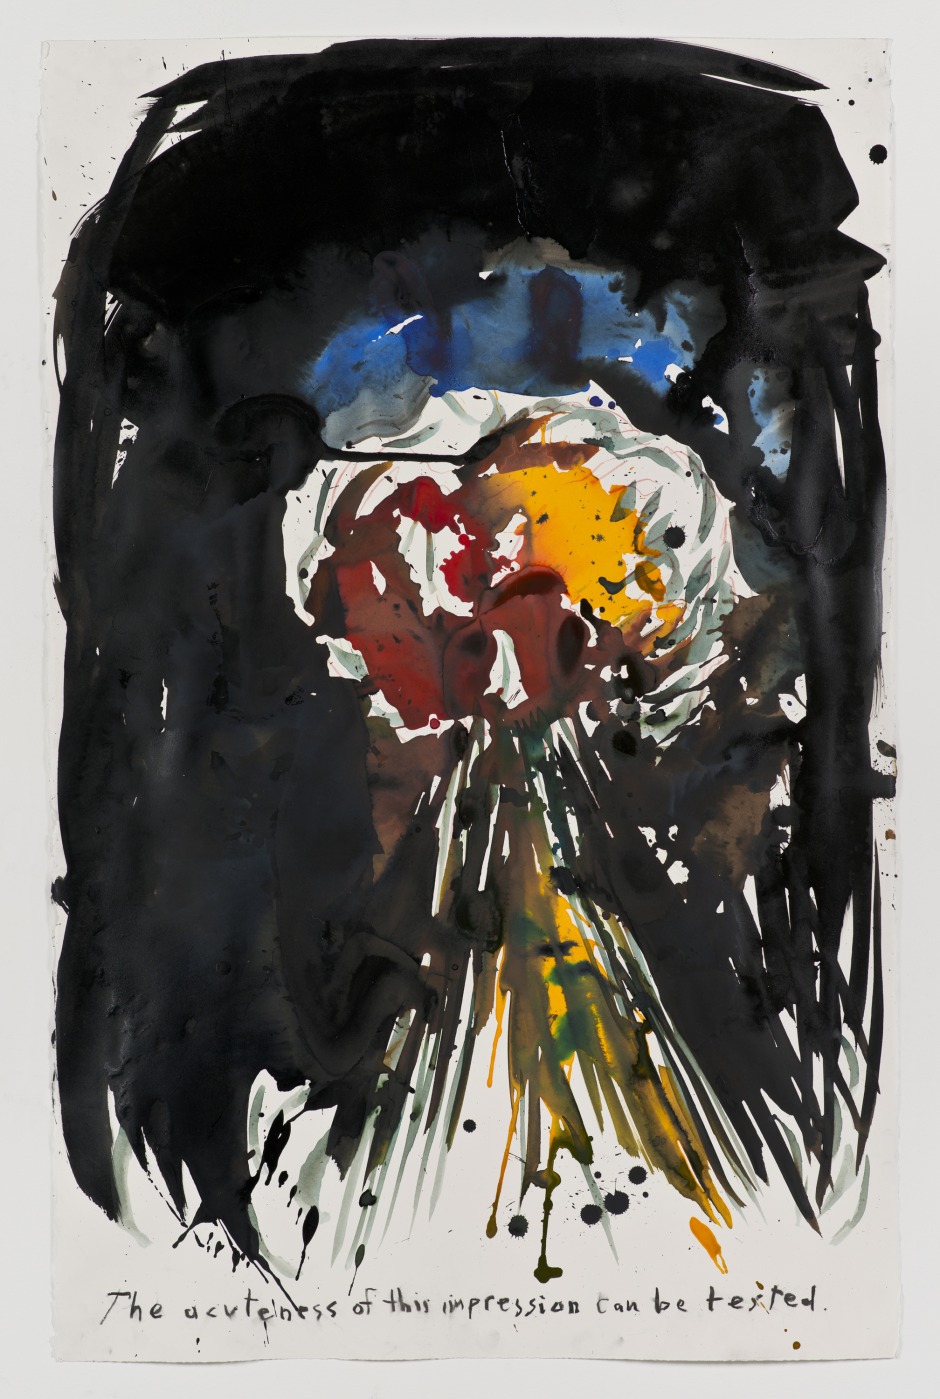 No Title (The acuteness of), 2012 charcoal, ink, gouache, acrylic and crayon on paper 102.2 x 66 cm / 40 1/4 x 26 in